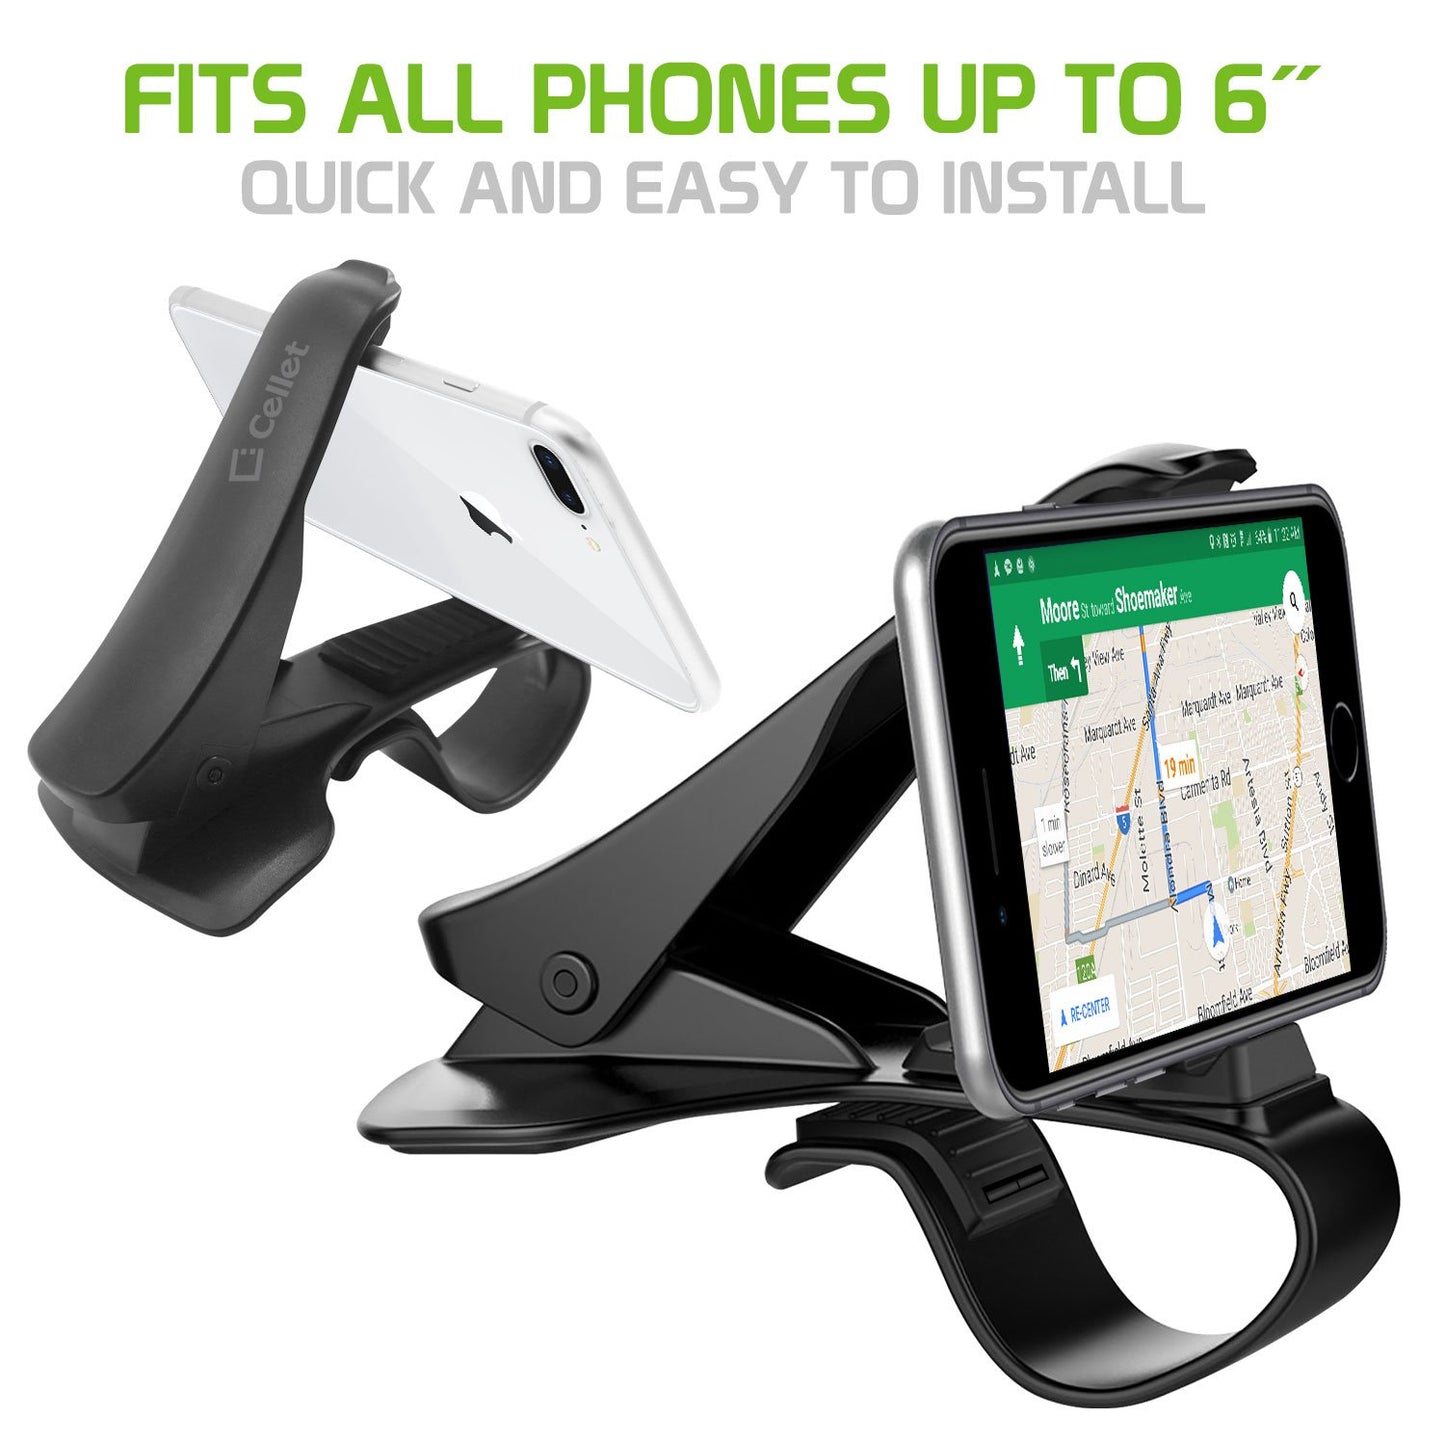 PHD270 - Dashboard Phone Holder, Clip Mount for Apple iPhone X, 8, 8 Plus, Samsung Galaxy Note 8, Samsung Galaxy S8, S8 Plus and More – by Cellet